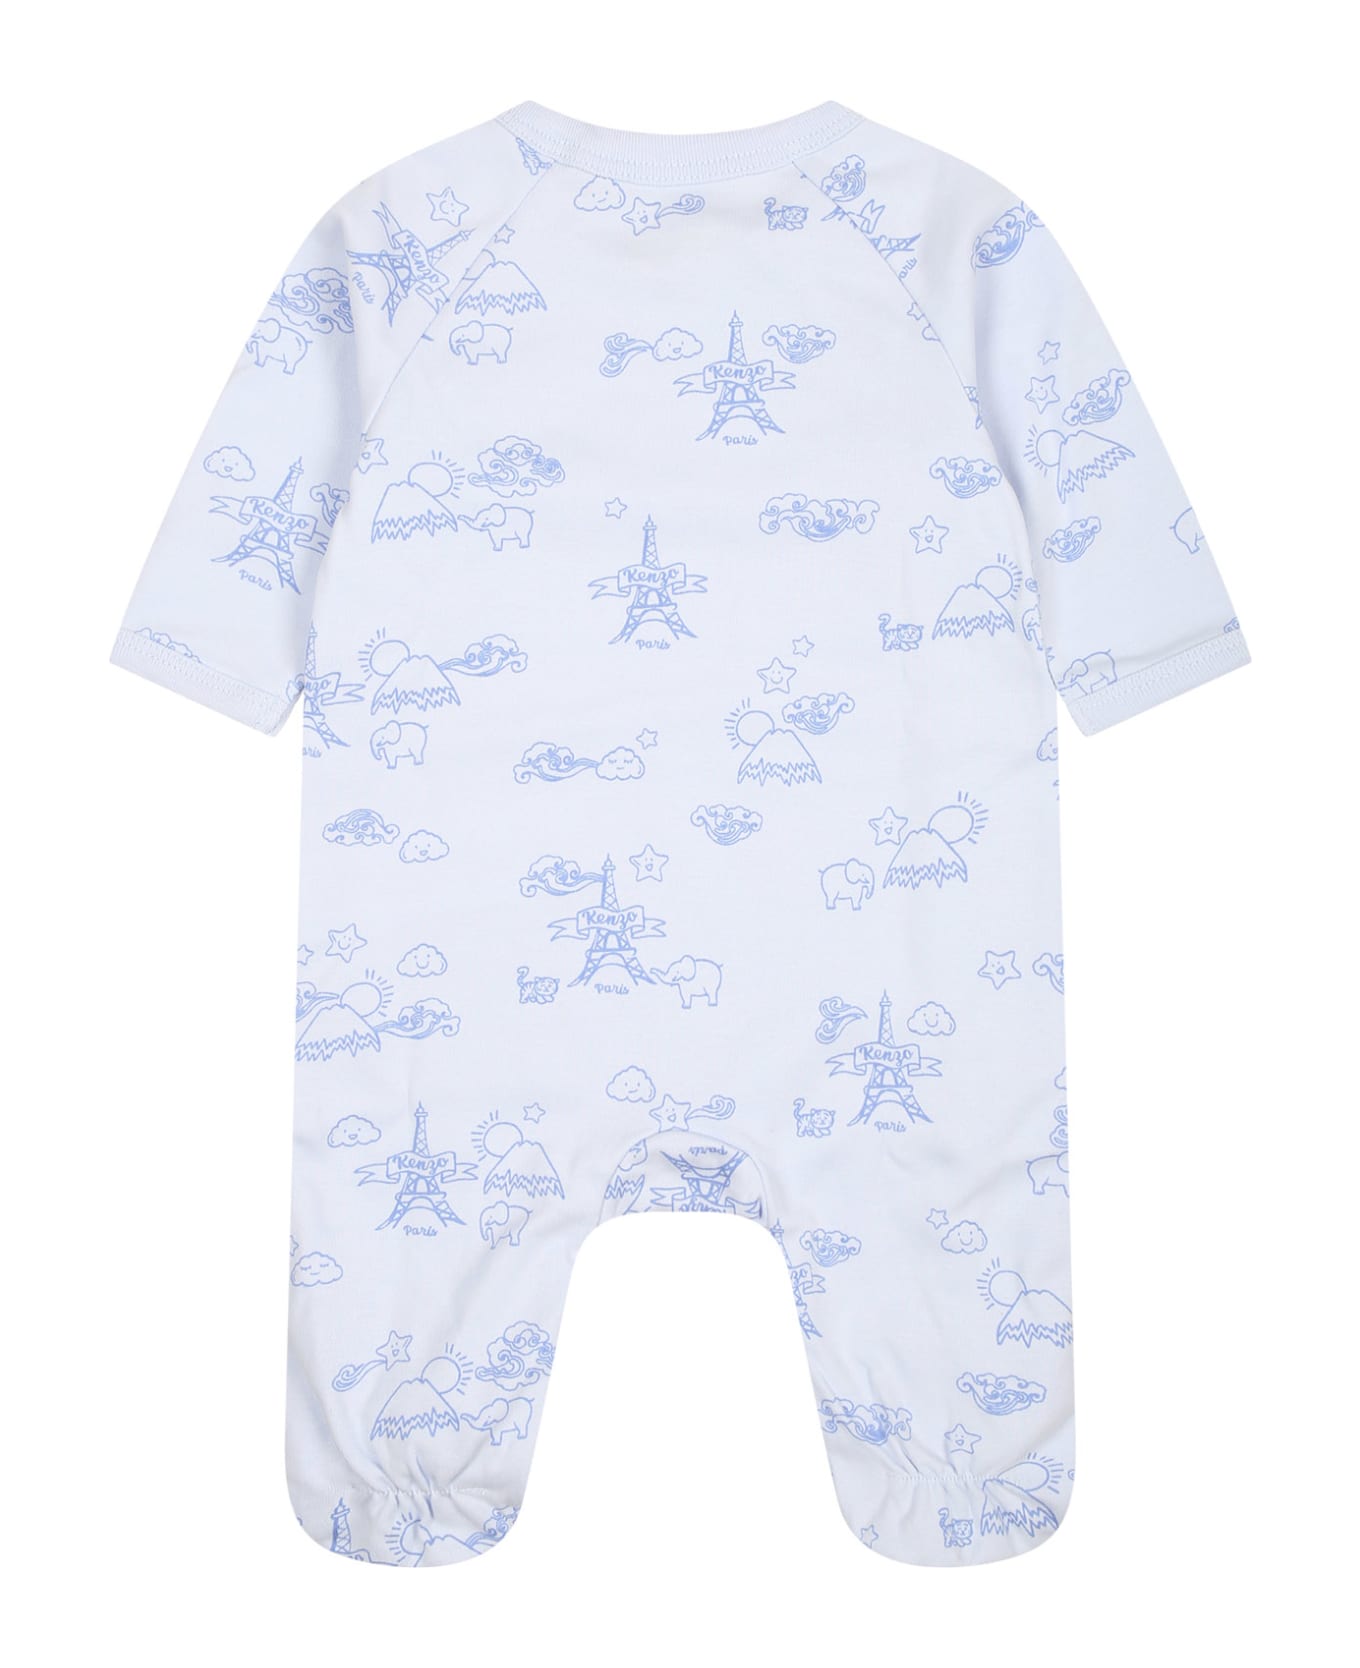 Kenzo Kids Light Blue Set For Baby Boy With Tour Eiffel And Print - Multicolor